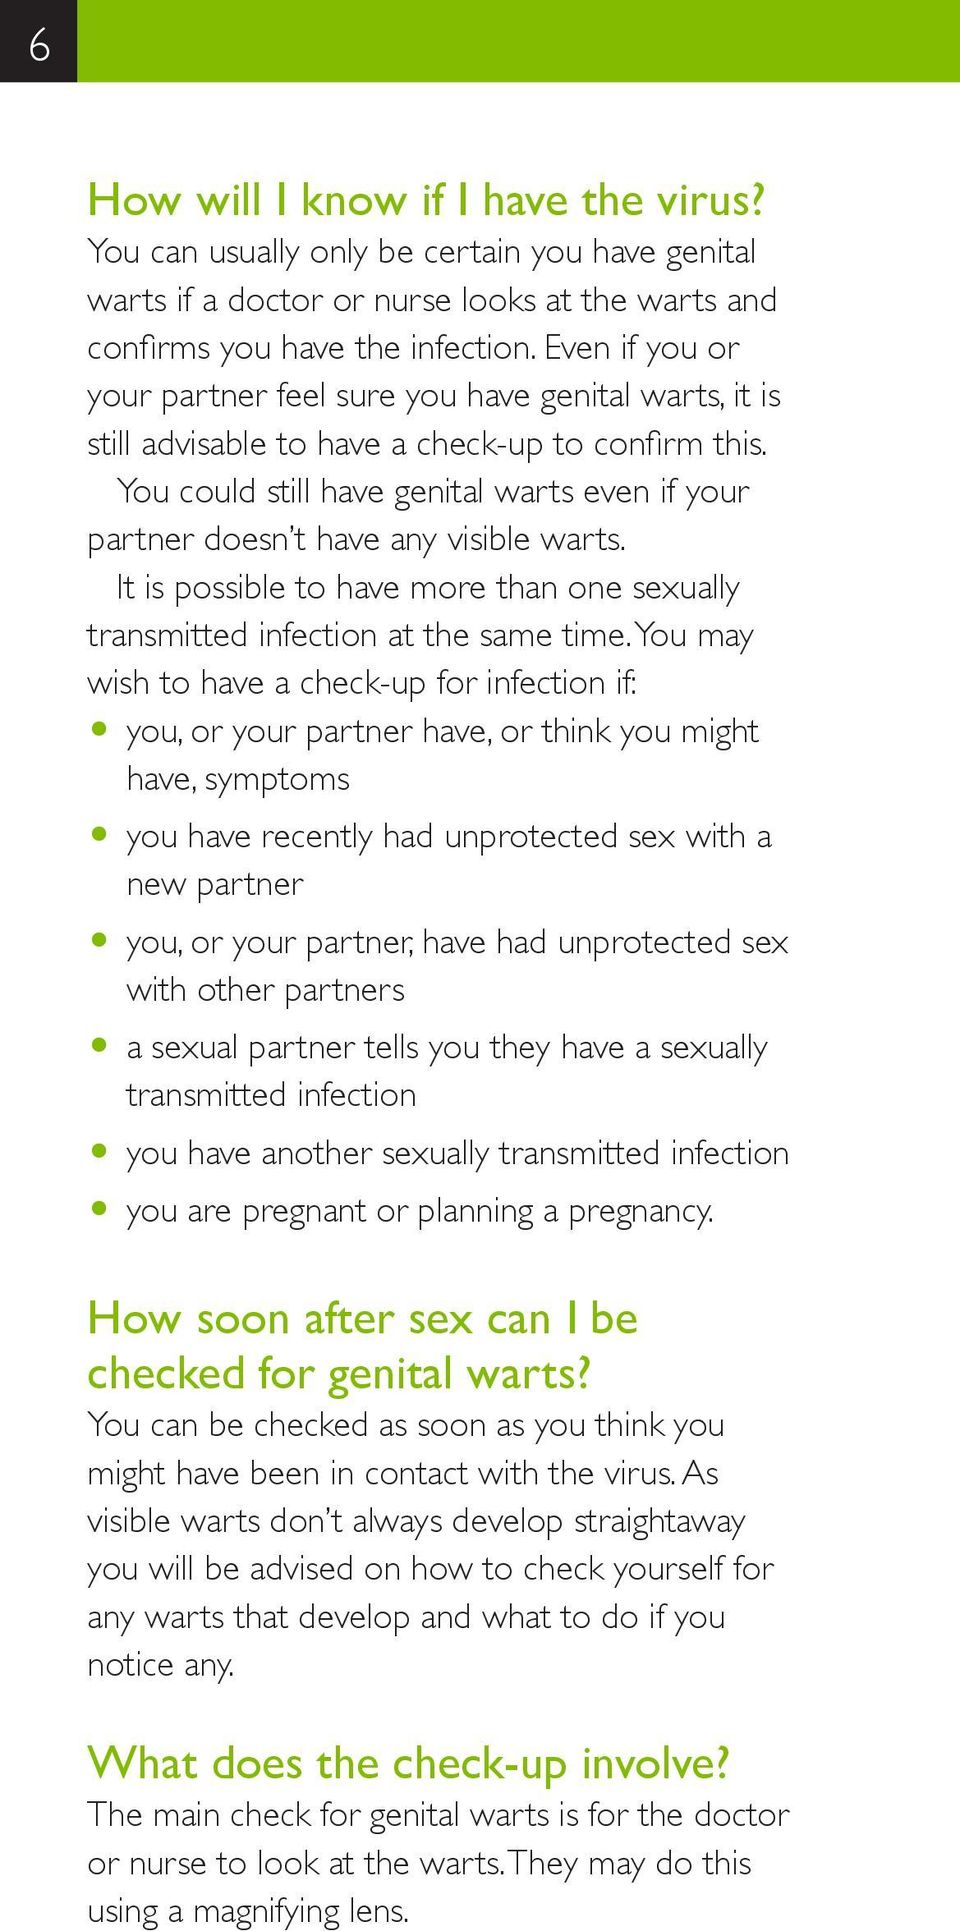 You could still have genital warts even if your partner doesn t have any visible warts. It is possible to have more than one sexually transmitted infection at the same time.